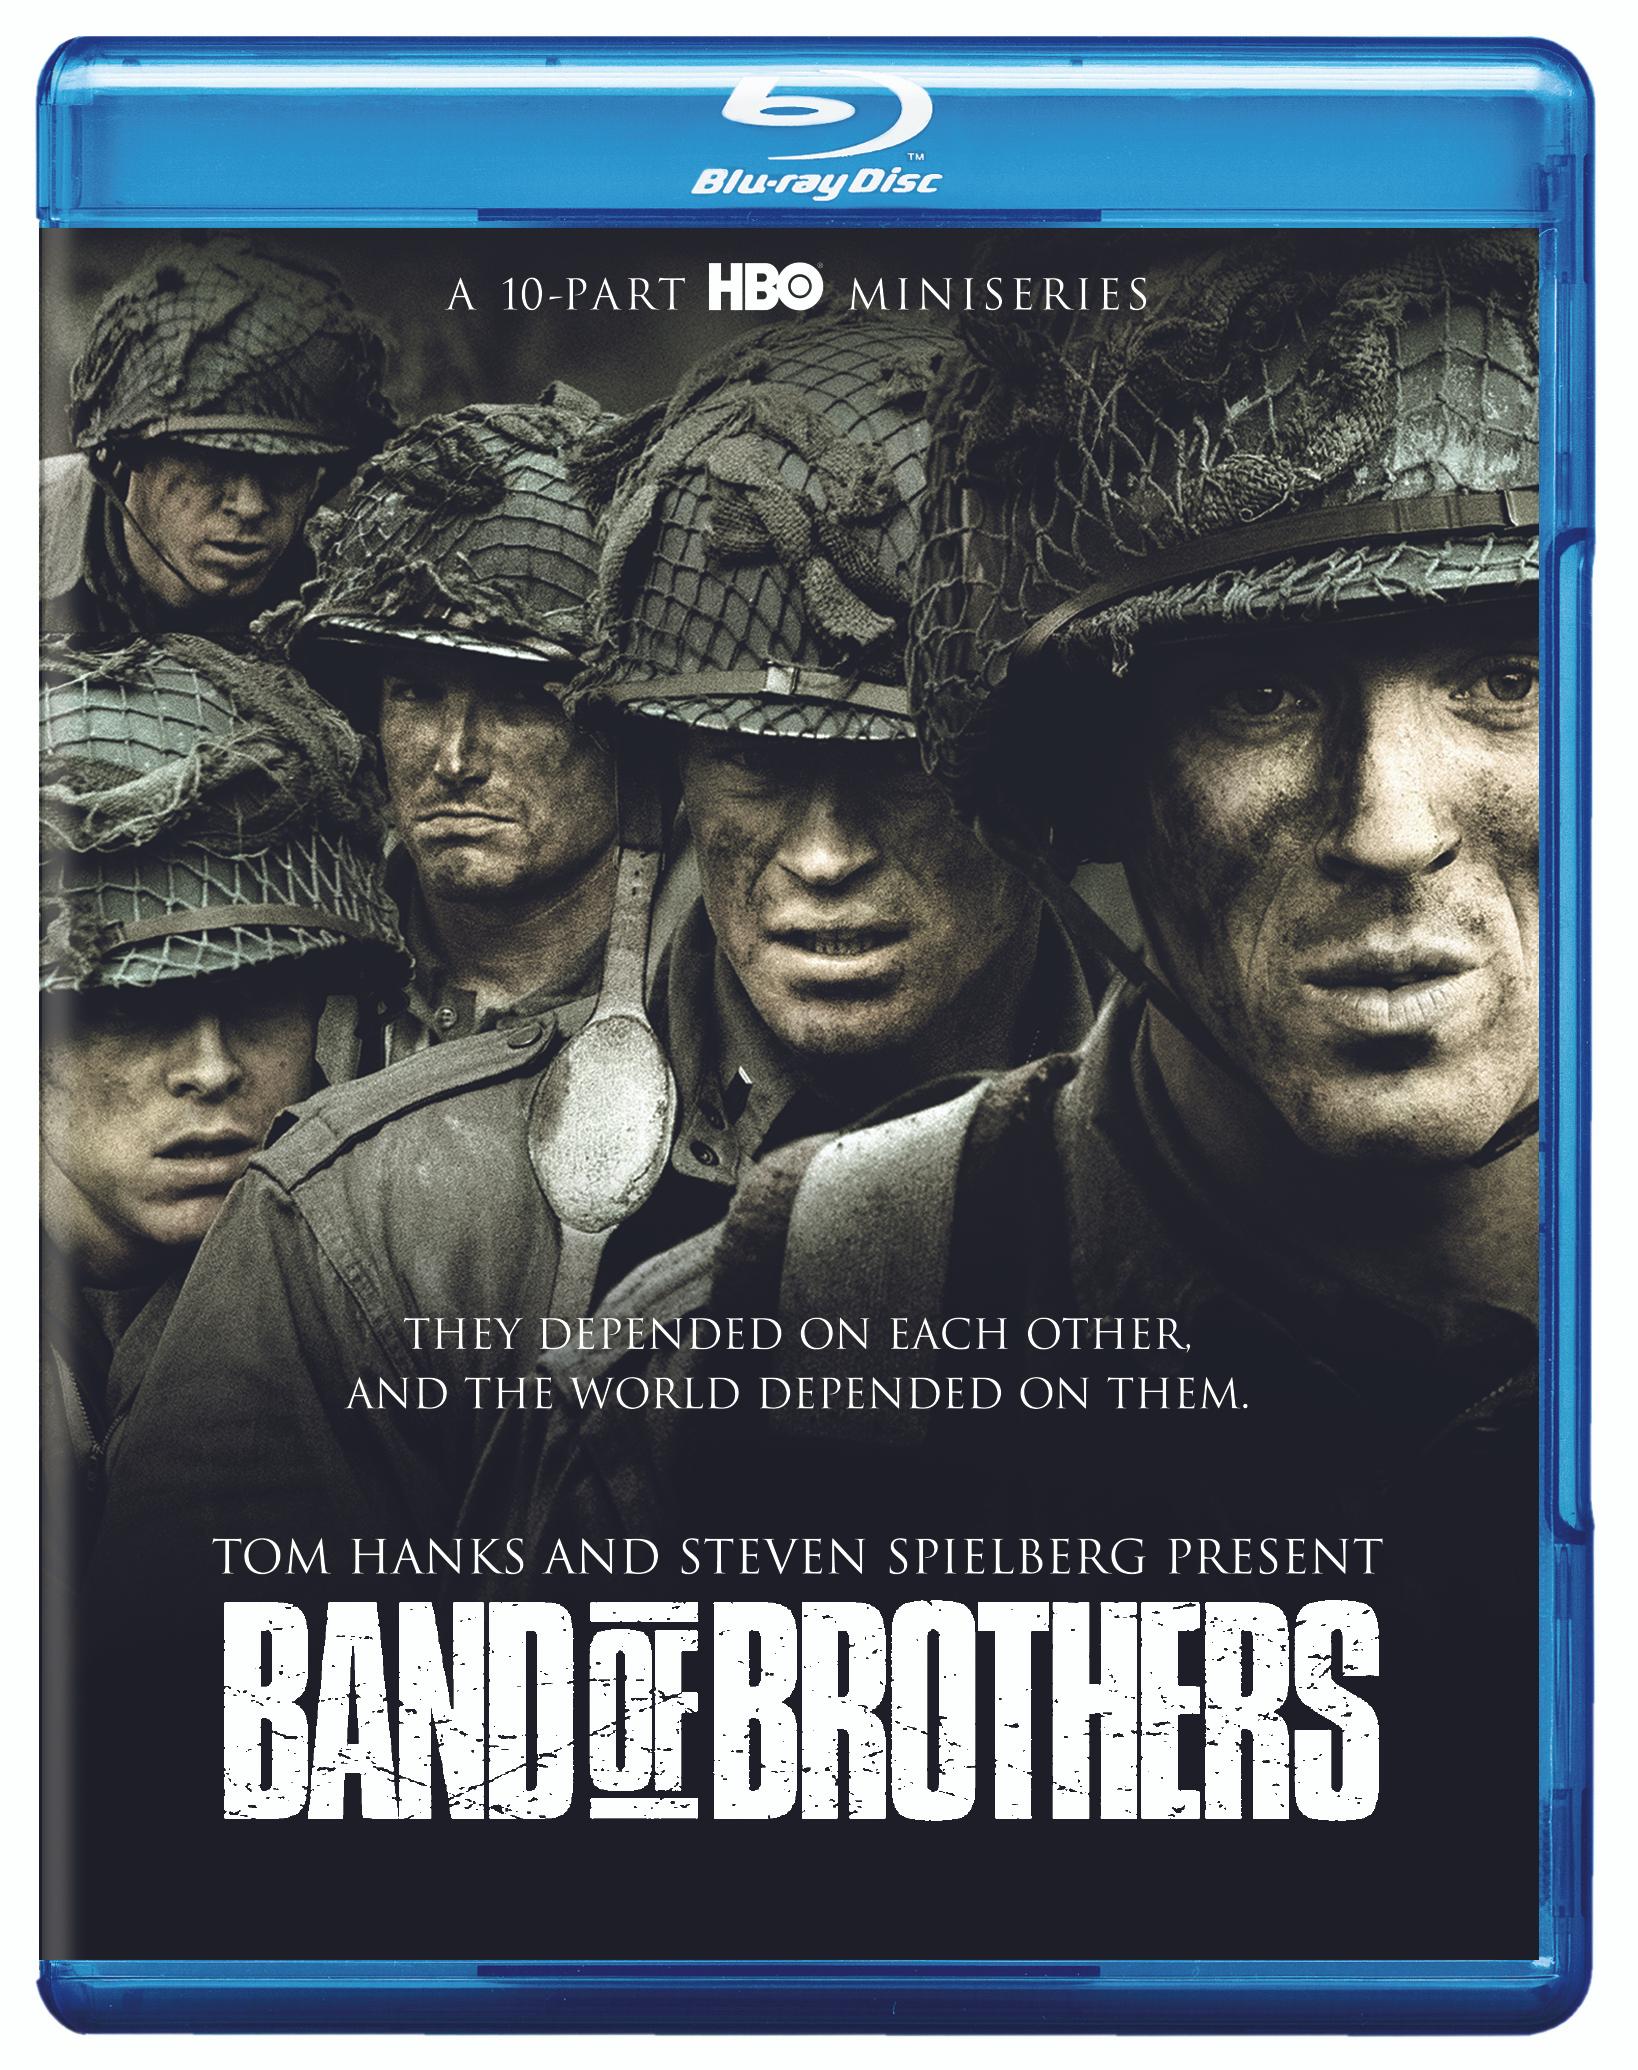 Band Of Brothers (Box Set) - Blu-ray [ 2001 ]  - Drama Television On Blu-ray - TV Shows On GRUV